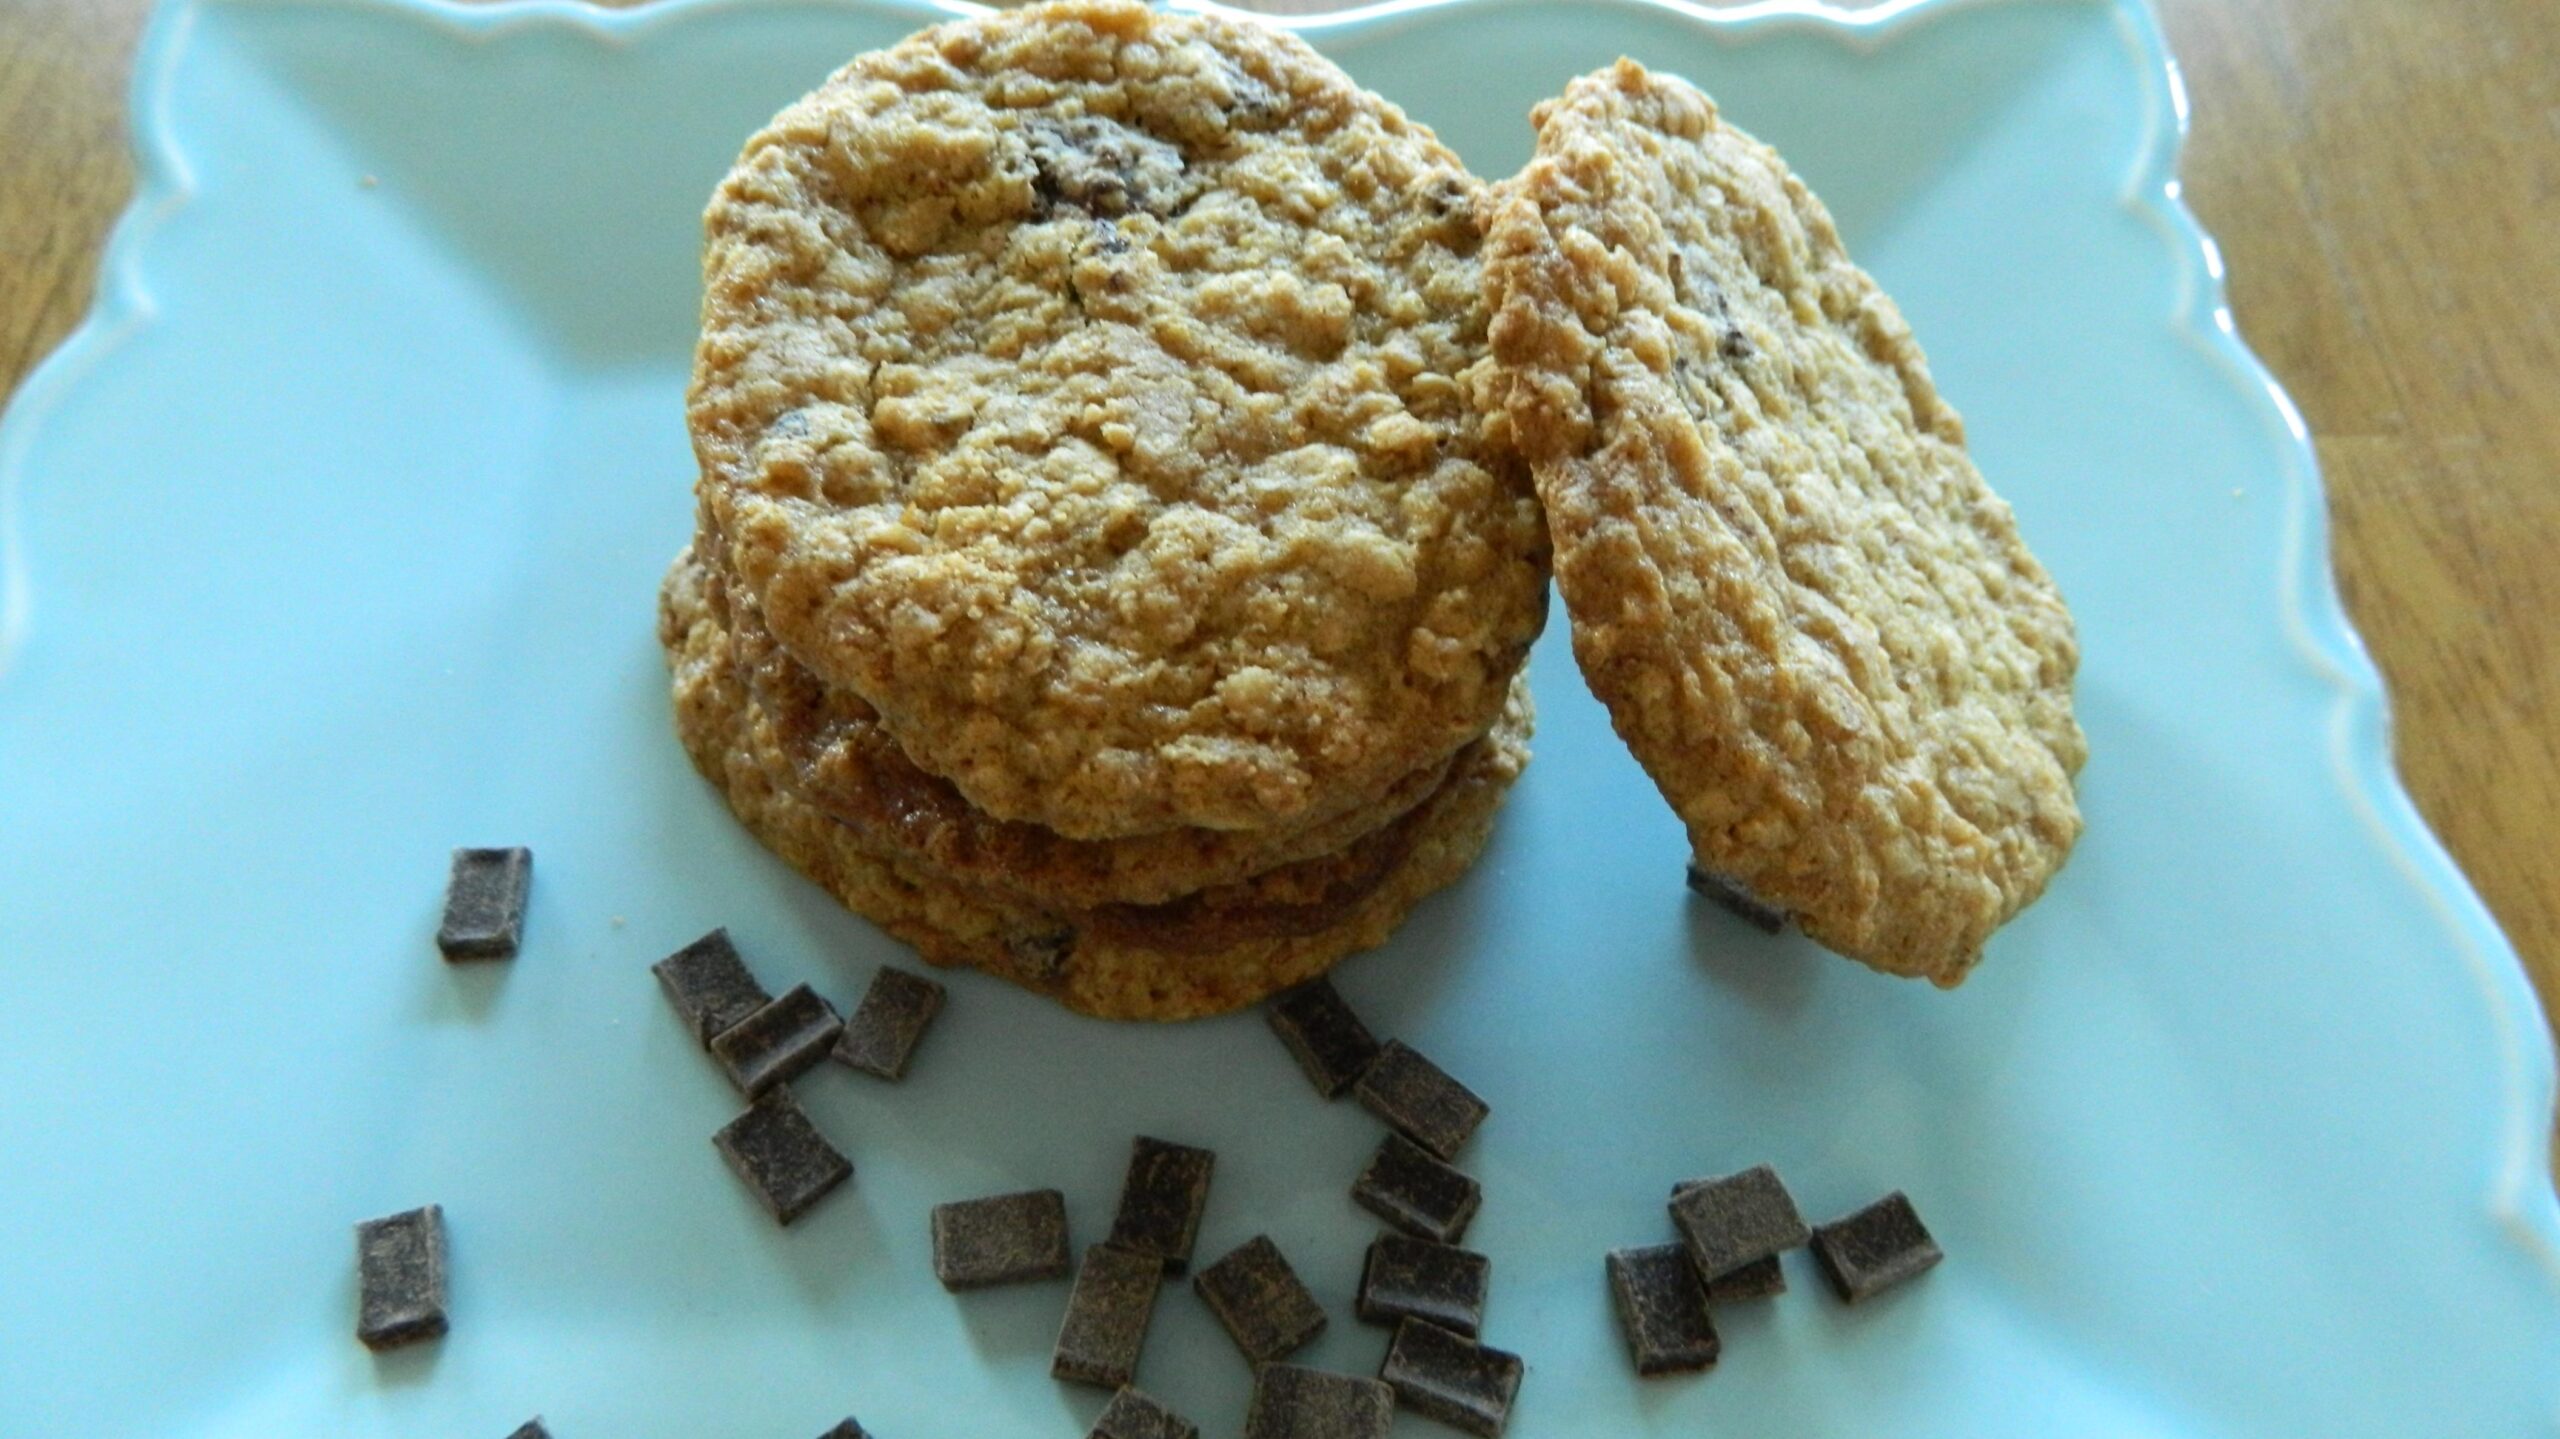 Delicious Gluten Free Chocolate Chip Oatmeal Cookies Recipe